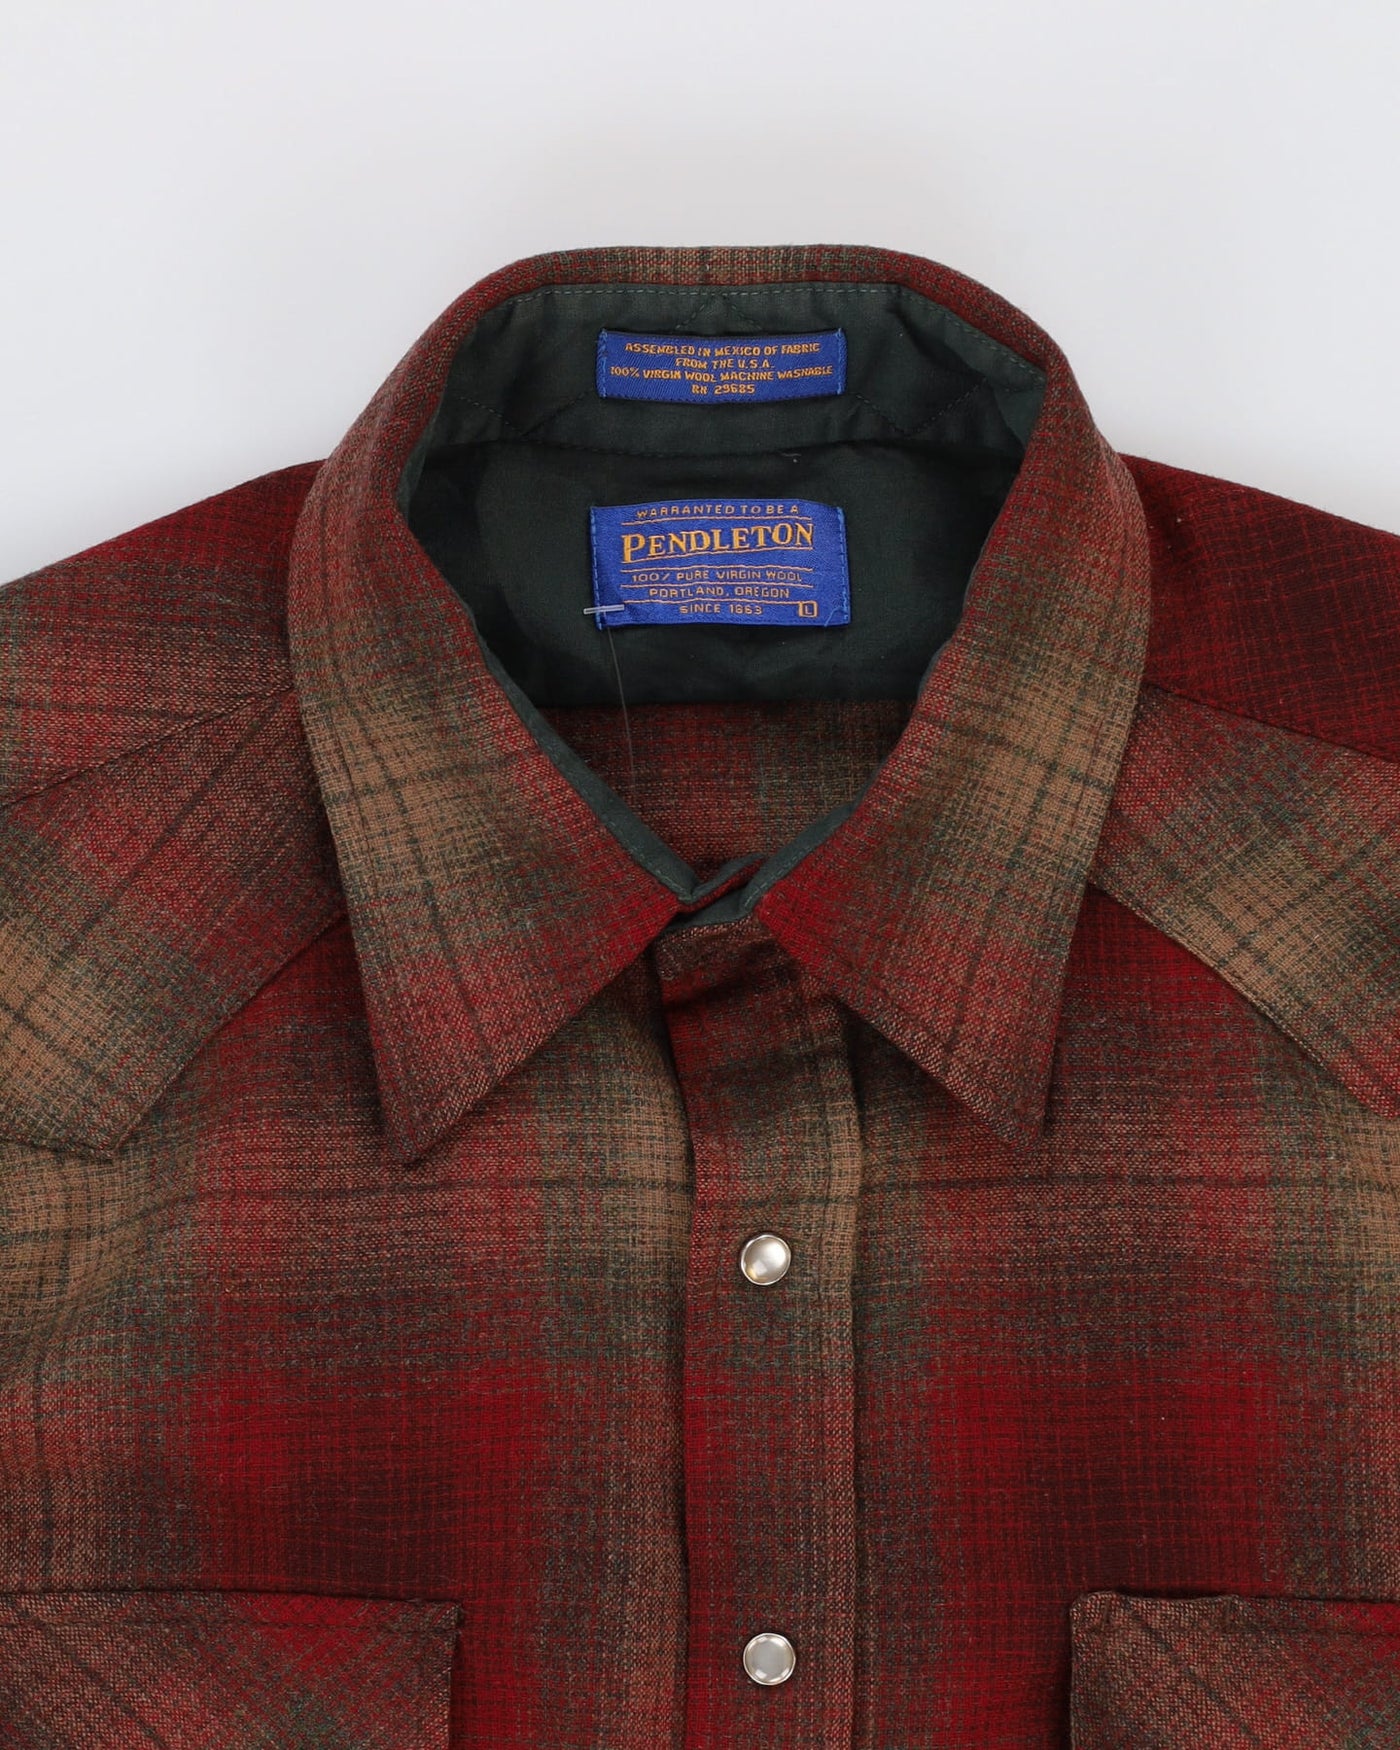 90s Pendleton Red Check Patterned Virgin Wool Flannel Shirt - L